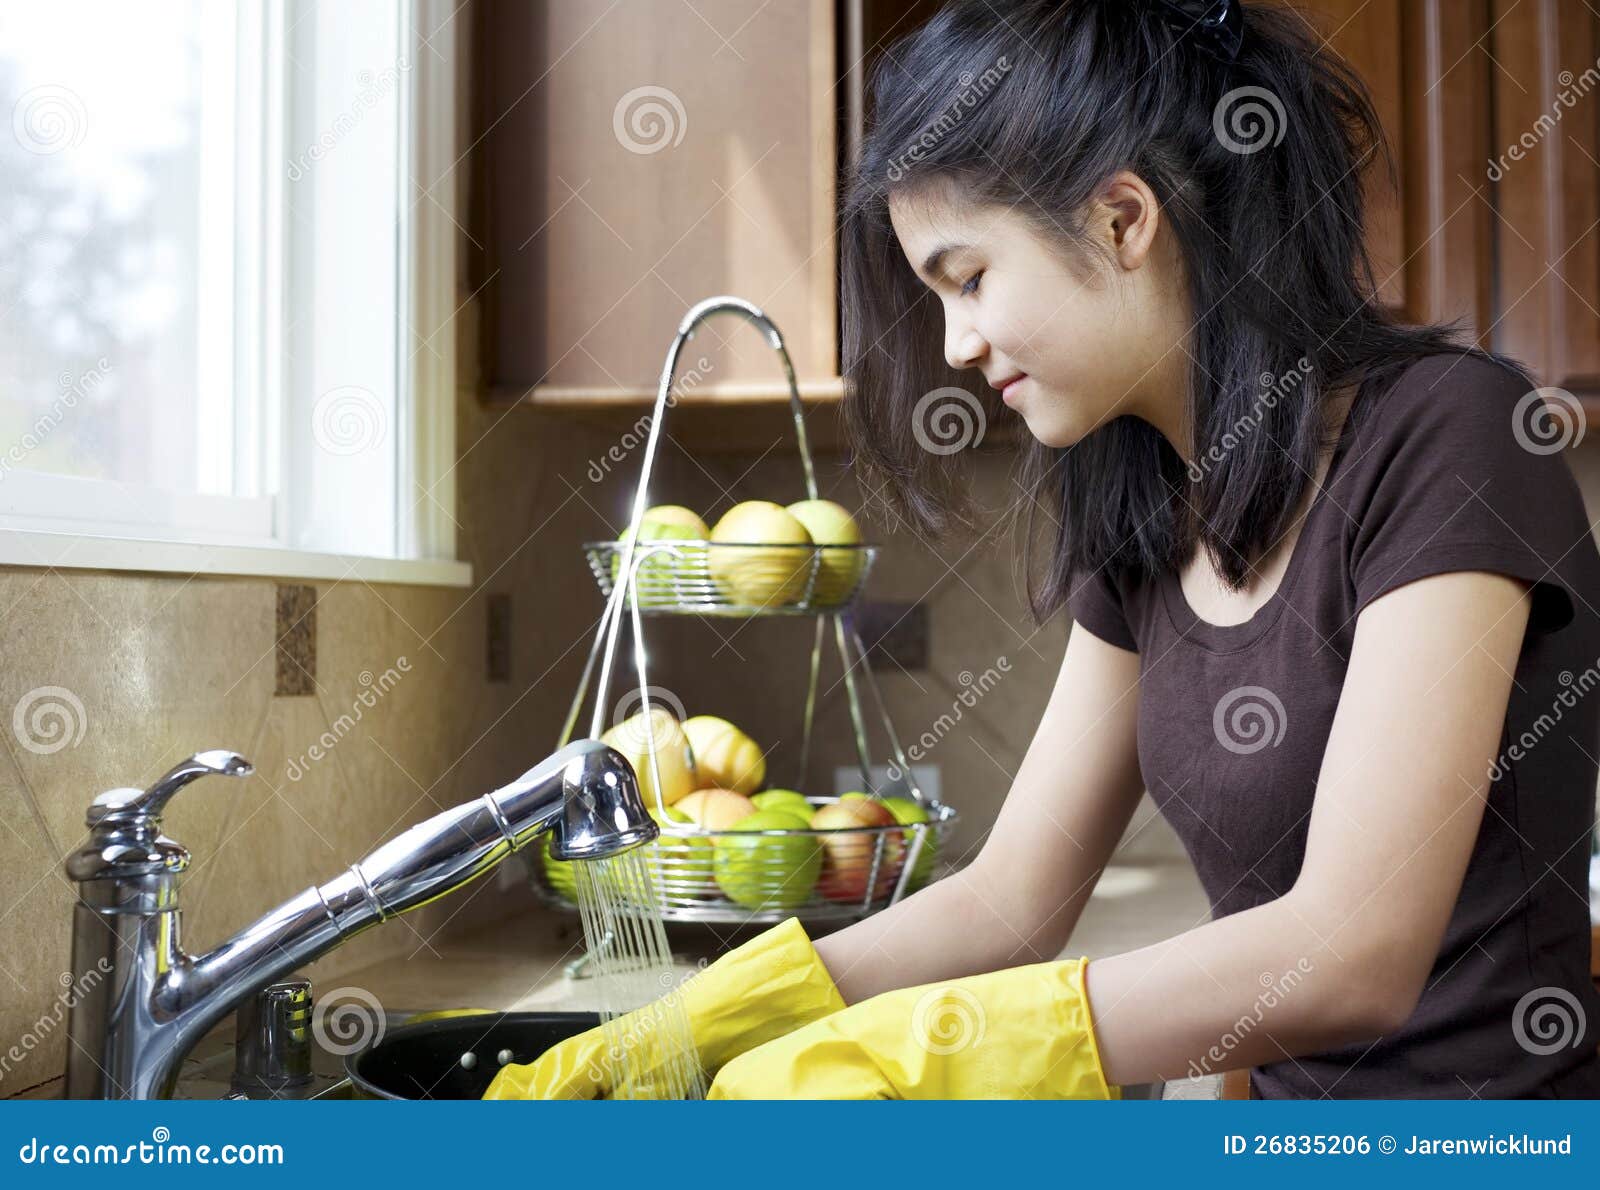 Teen Girl Washing Dishes In Kitchen Stock Photo Imag